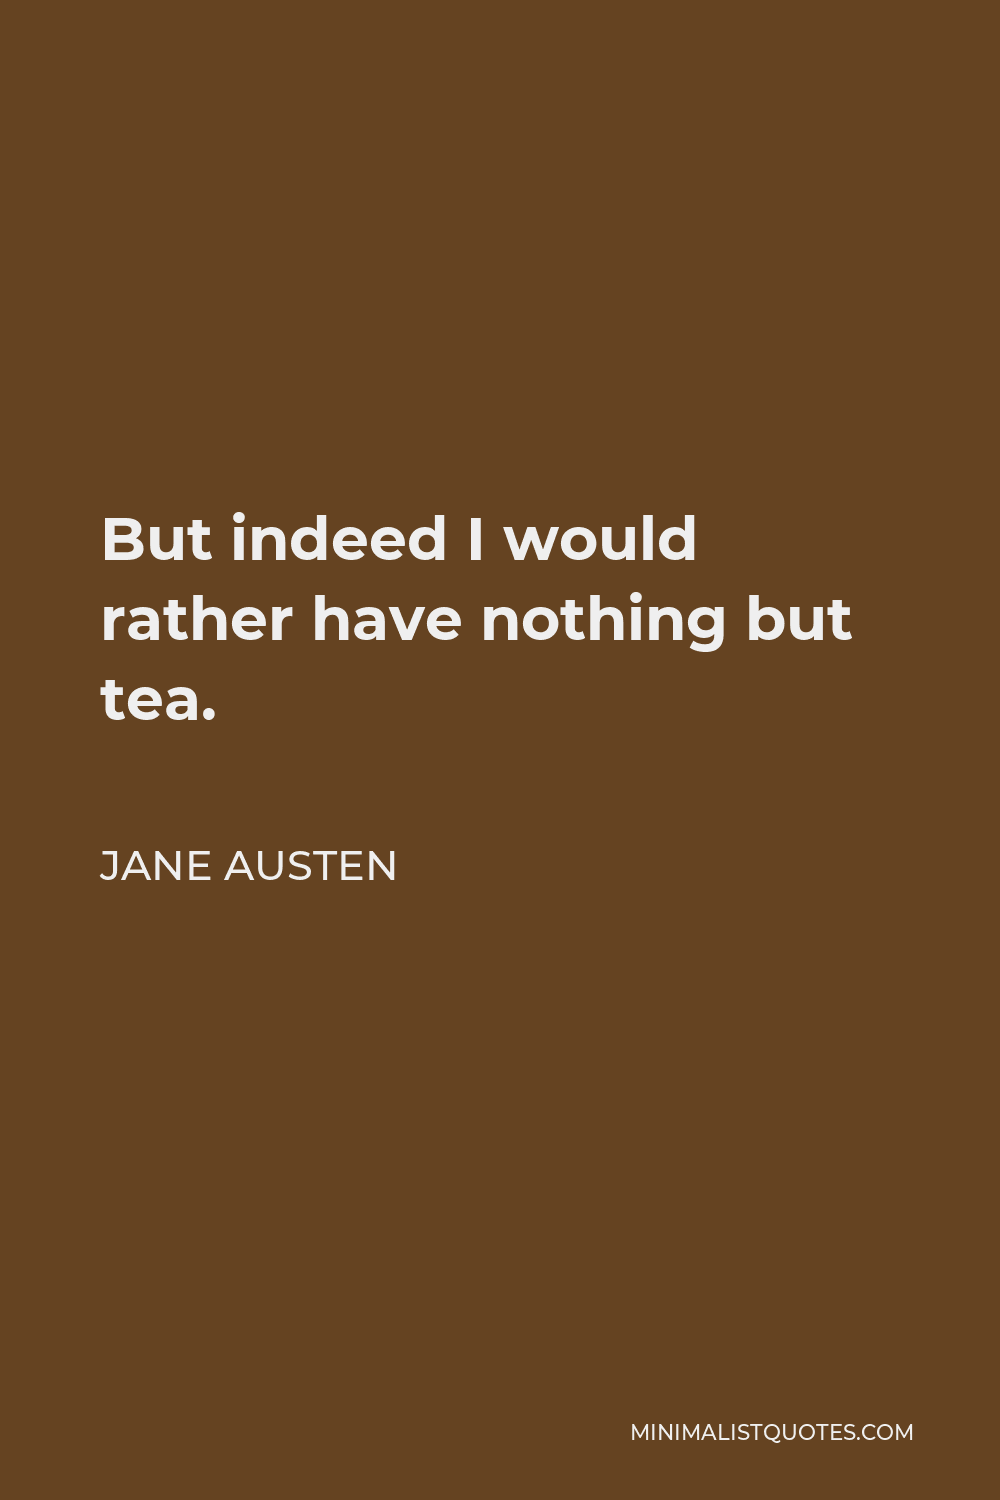 Jane Austen Quote - But indeed I would rather have nothing but tea.